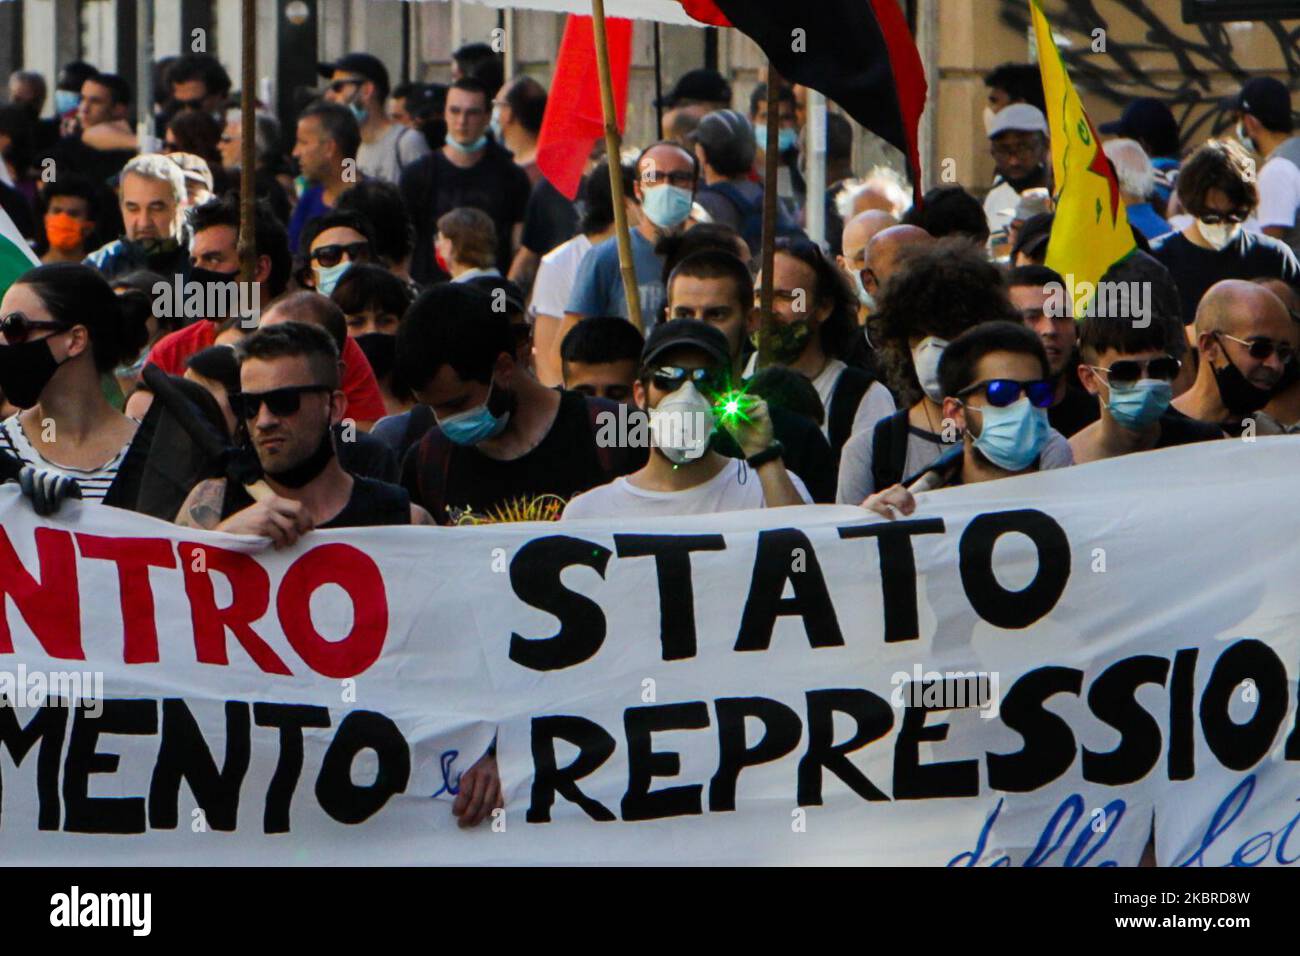 Rally of anarchist demonstrators against the region and the Italian Government in Via Padova and Piazzale Loreto, Milan, Italy on June 20, 2020 (Photo by Mairo Cinquetti/NurPhoto) Stock Photo